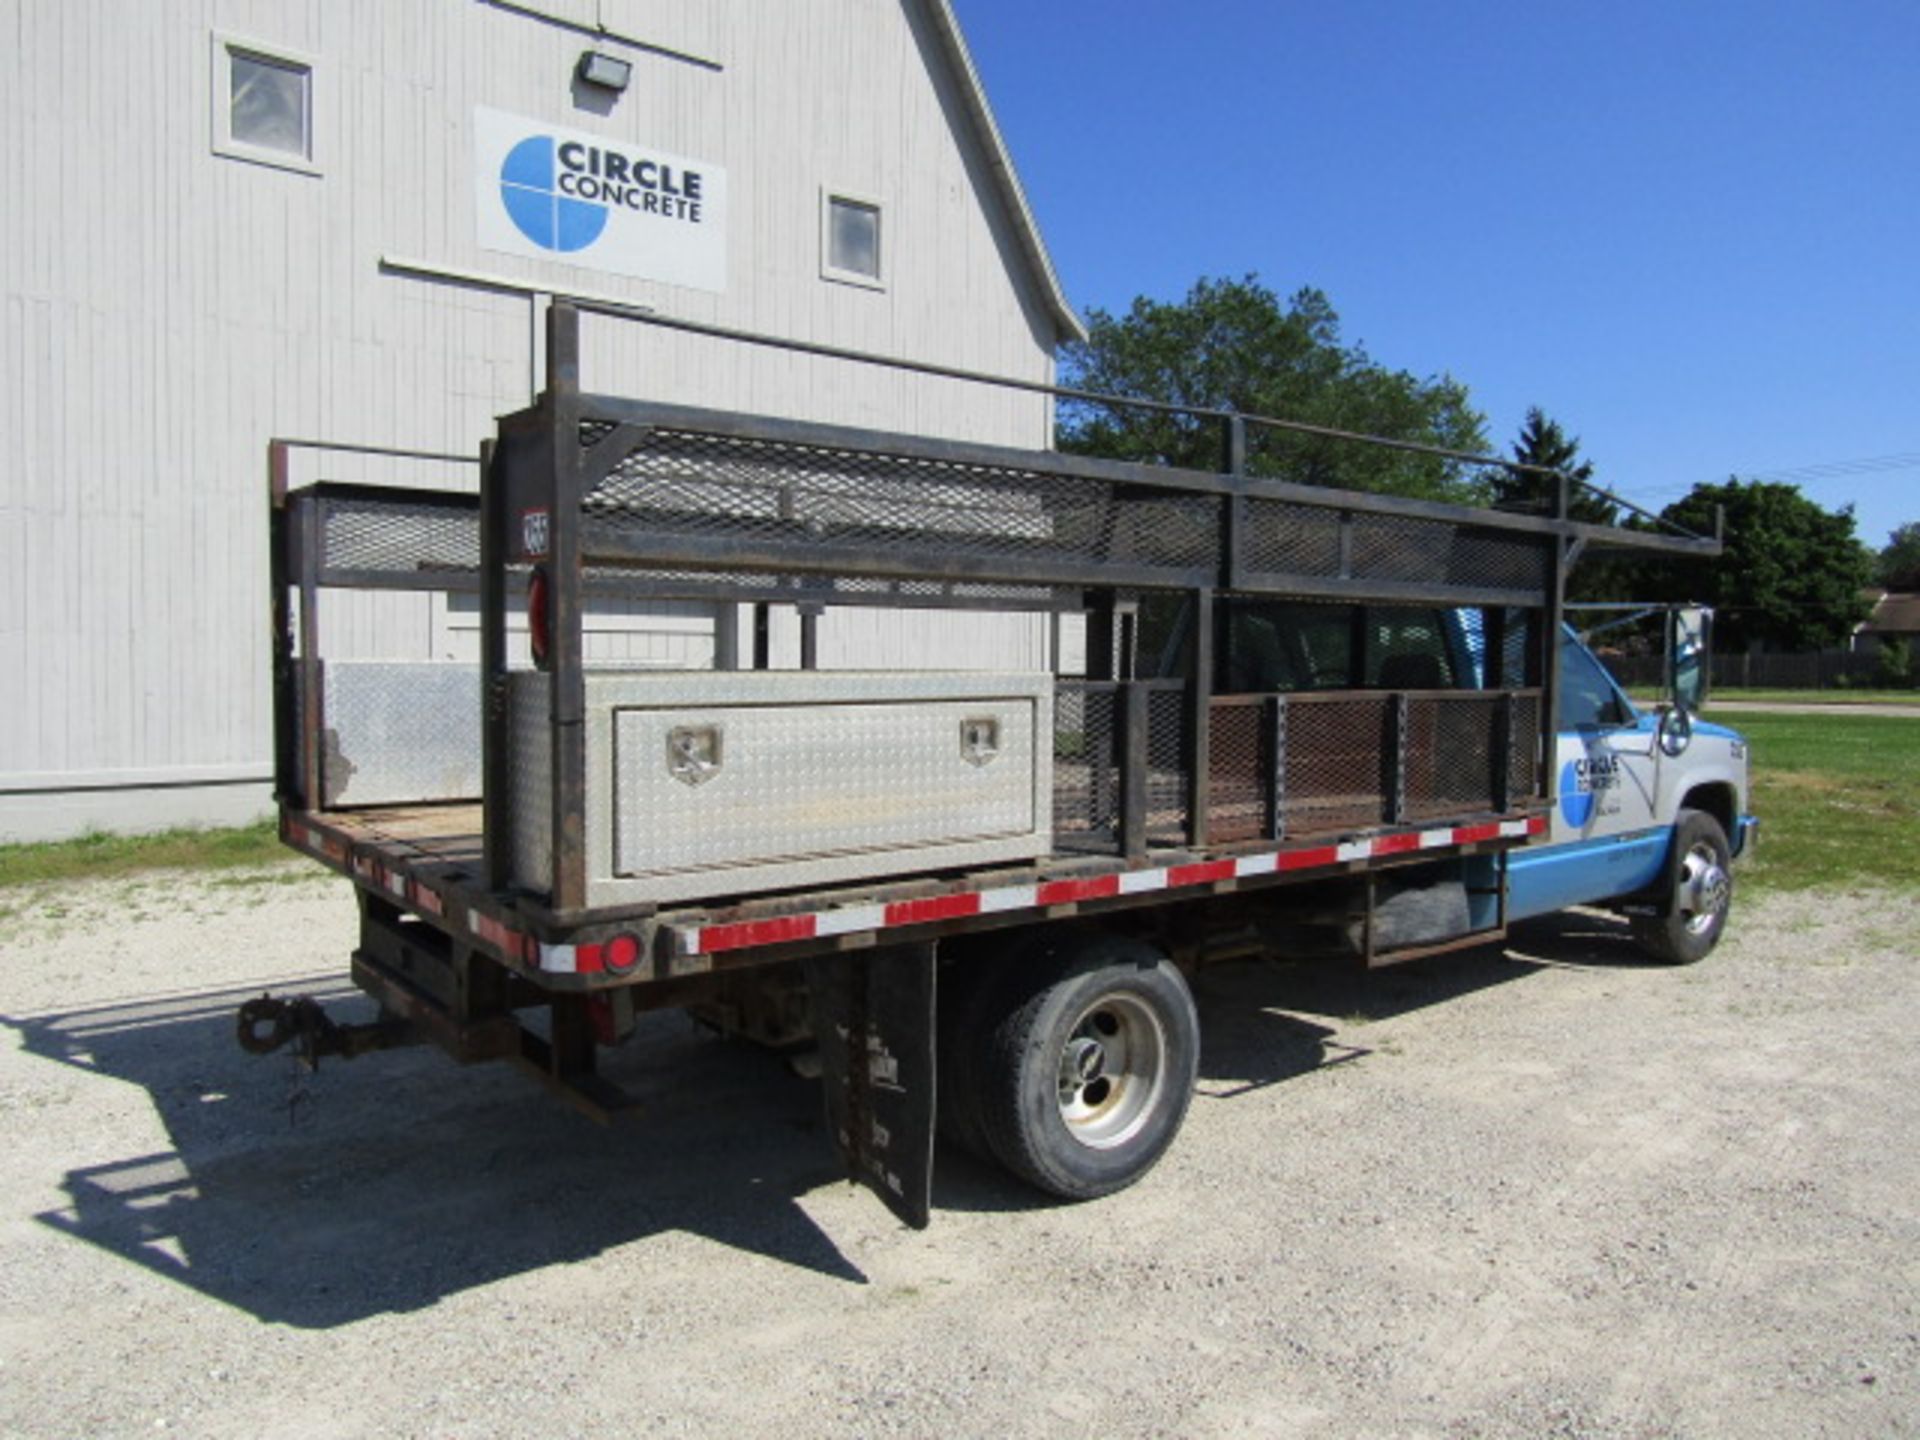 1999 Chevy 3500 Form Pick Up w/Tool Boxes, 9' Bed, Model GMT-400, Dually, VIN #1GBJC34J0XF063255, - Image 4 of 27